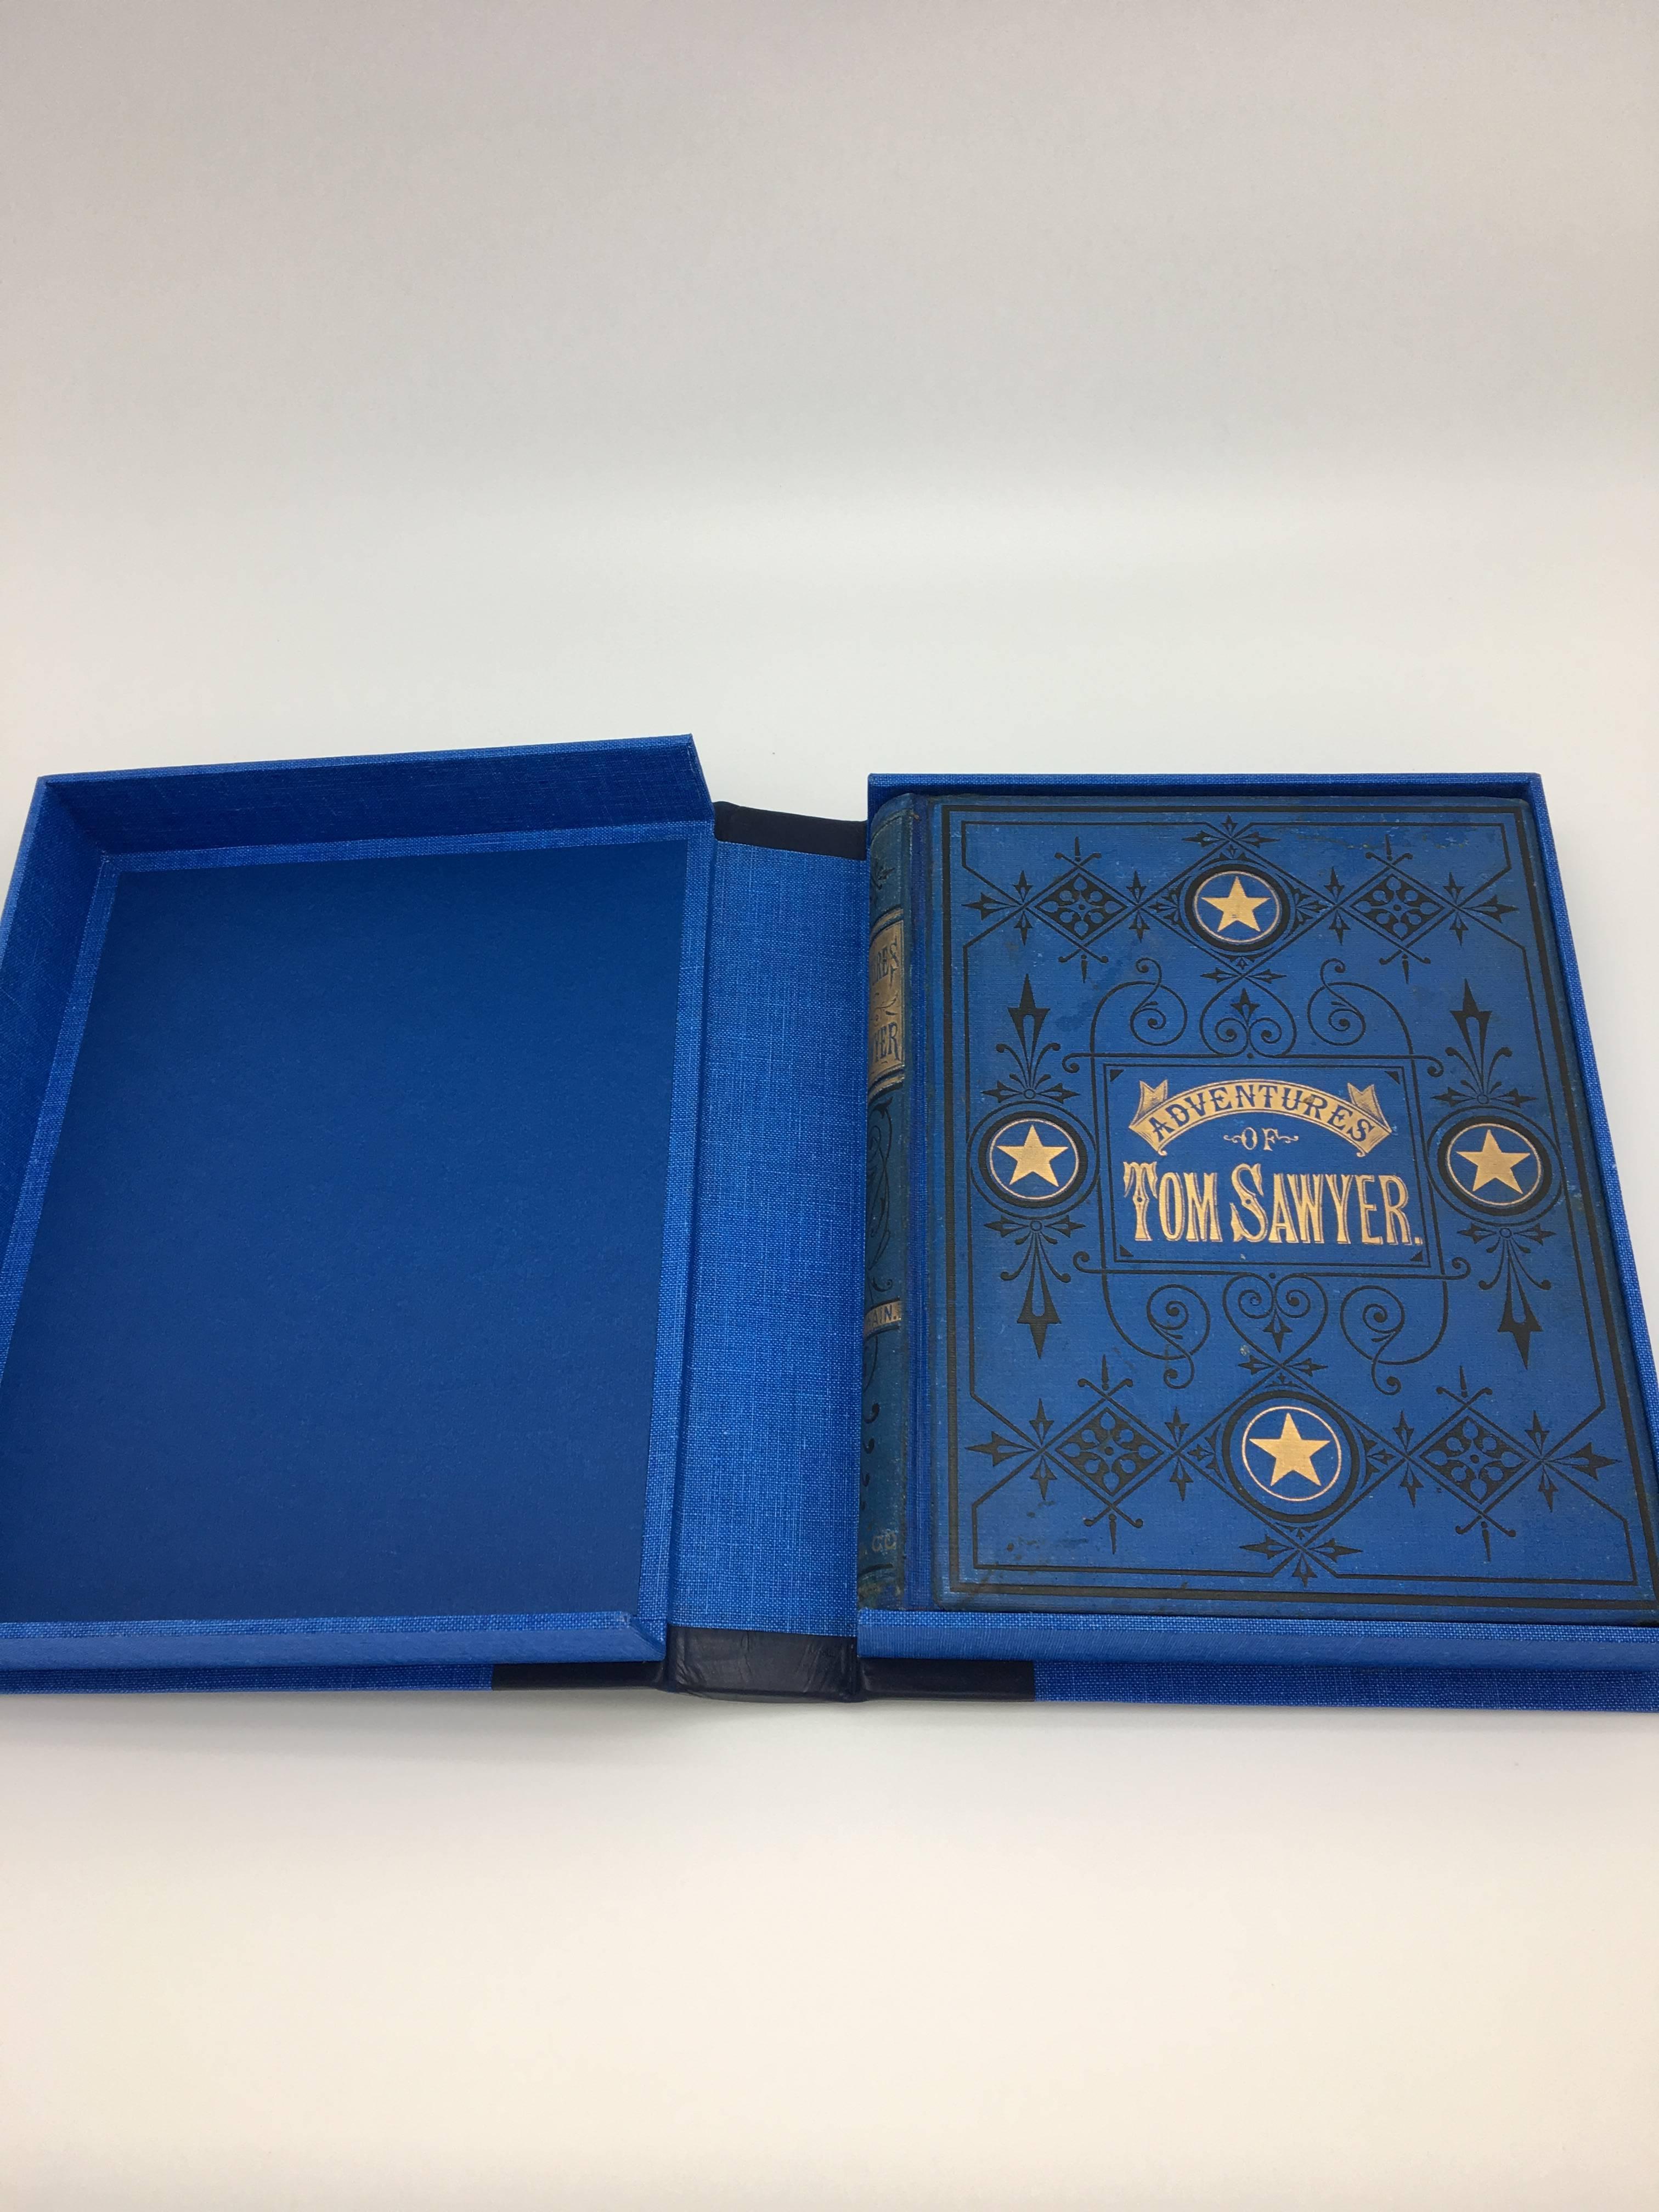 Twain, Mark. The Adventures of Tom Sawyer. Hartford, Connecticut: The American Publishing Company, 1876. First US edition, Second printing. Octavo, original gilt and black-stamped blue pictorial cloth. With by 144 illustrations.

This is the rare,